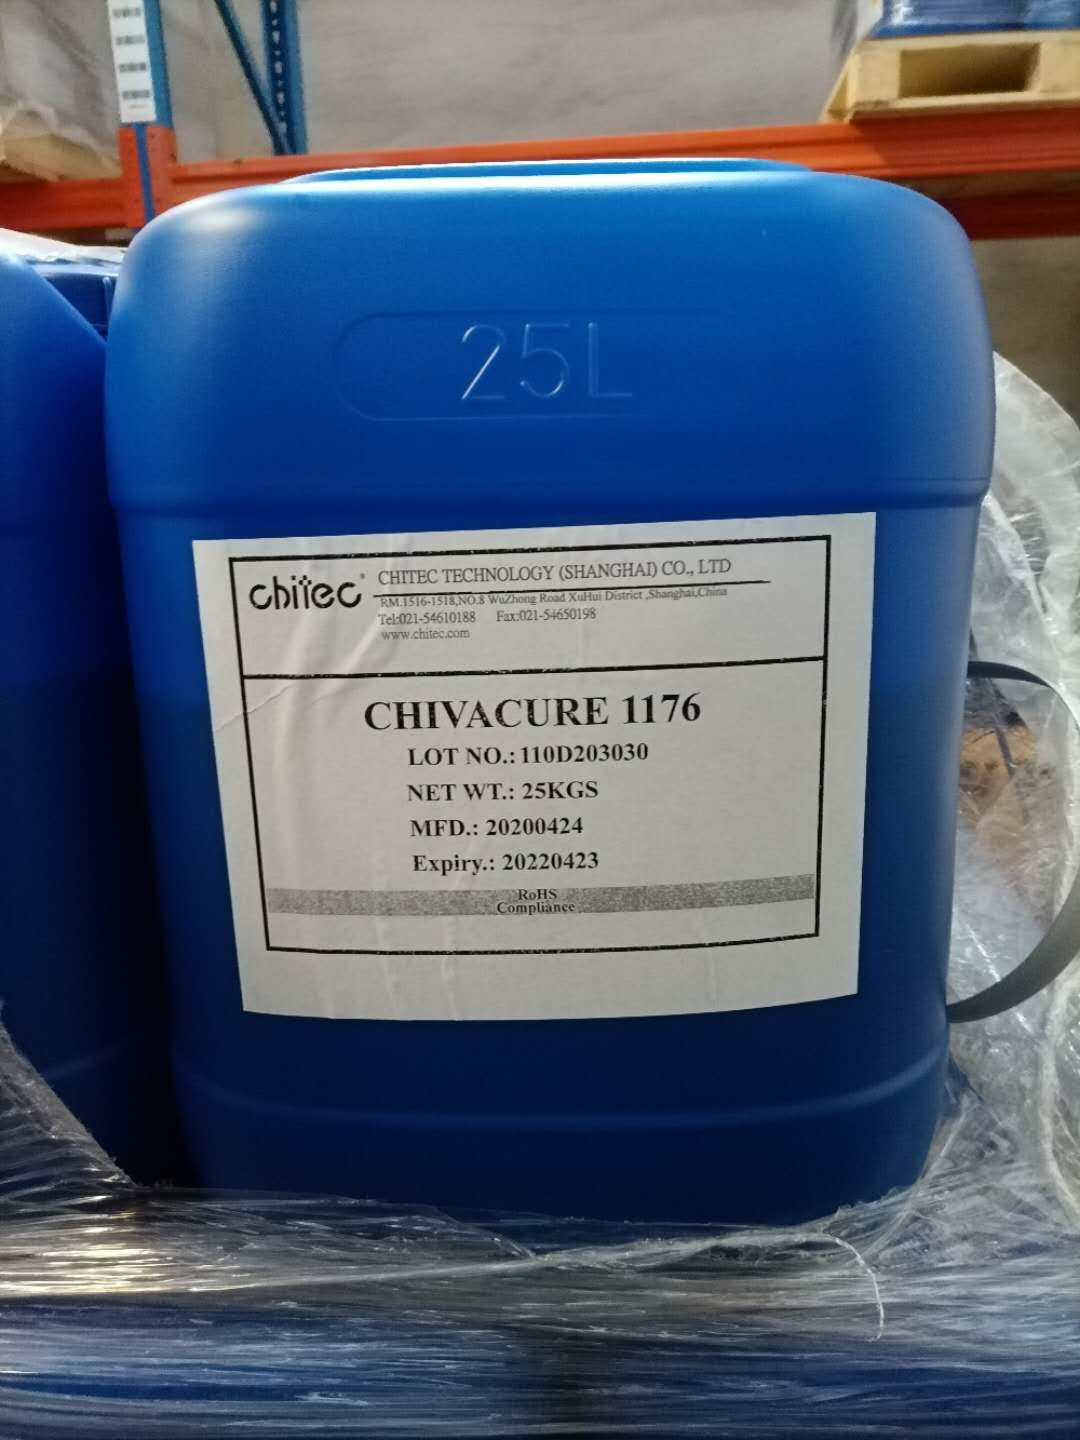 Chivacure 1176